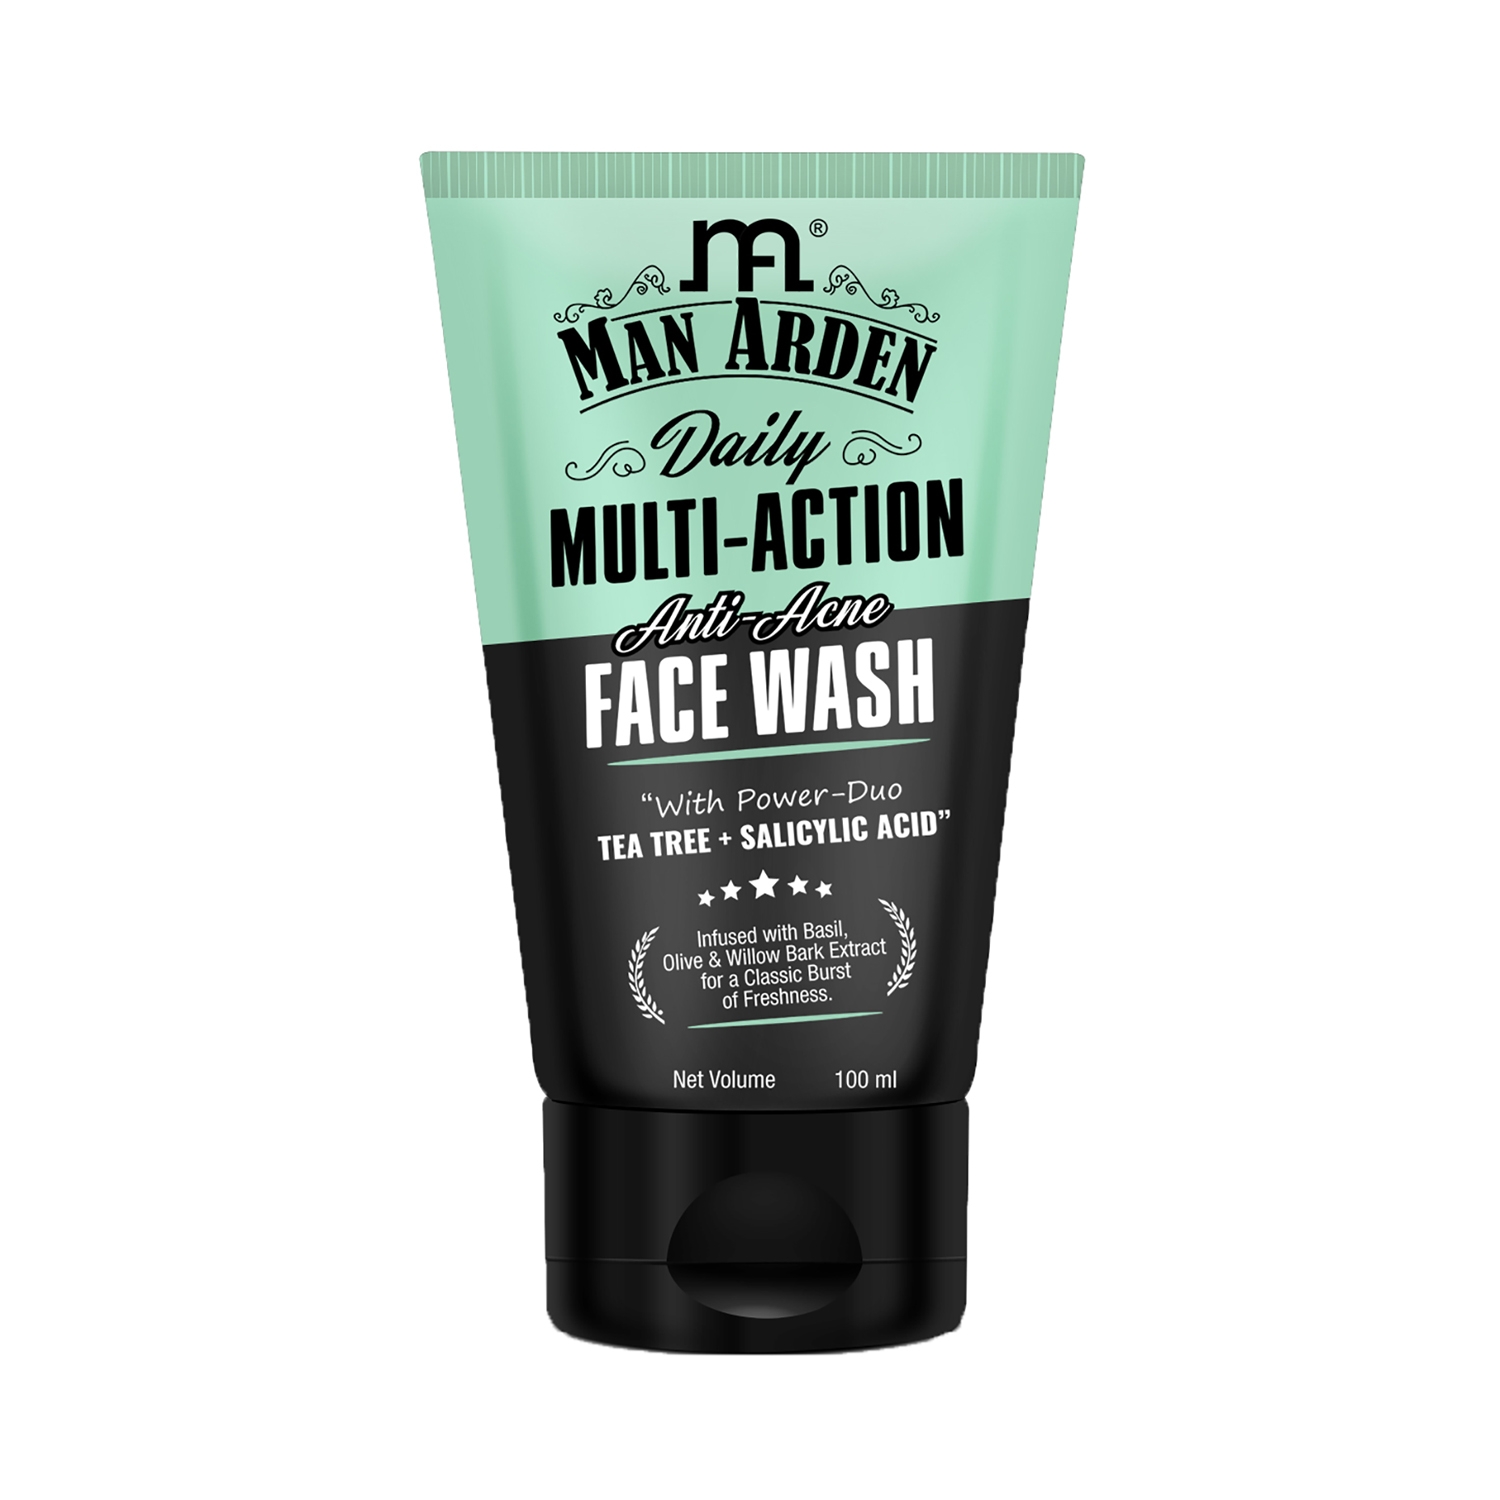 Man Arden | Man Arden Daily Multi-Action Anti-Acne Face Wash For Oily Skin With Power Duo Tea Tree & Salicylic Acid 1% (100ml)